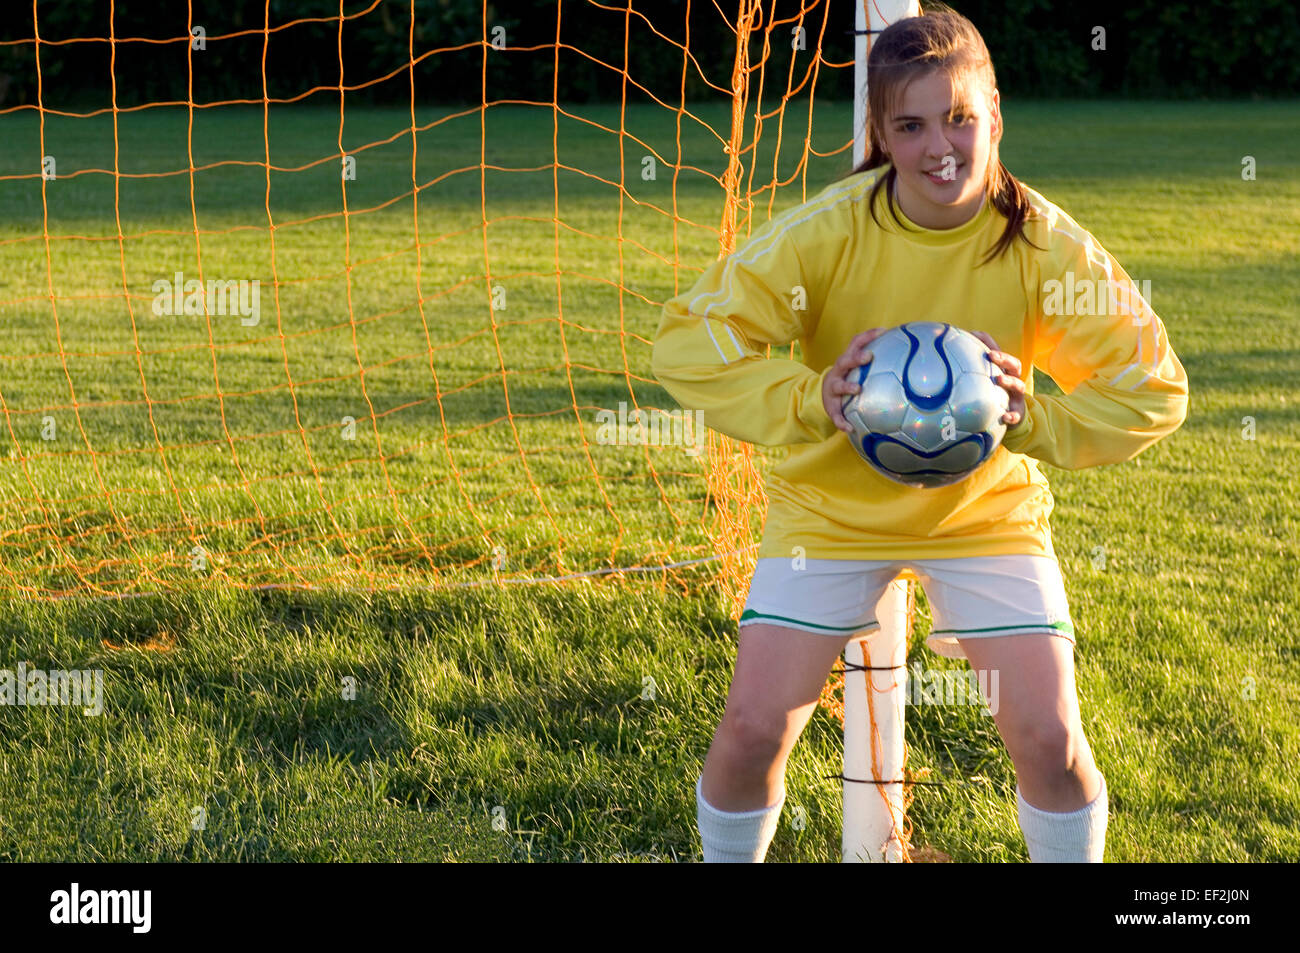 Girl on a soccer field Stock Photo